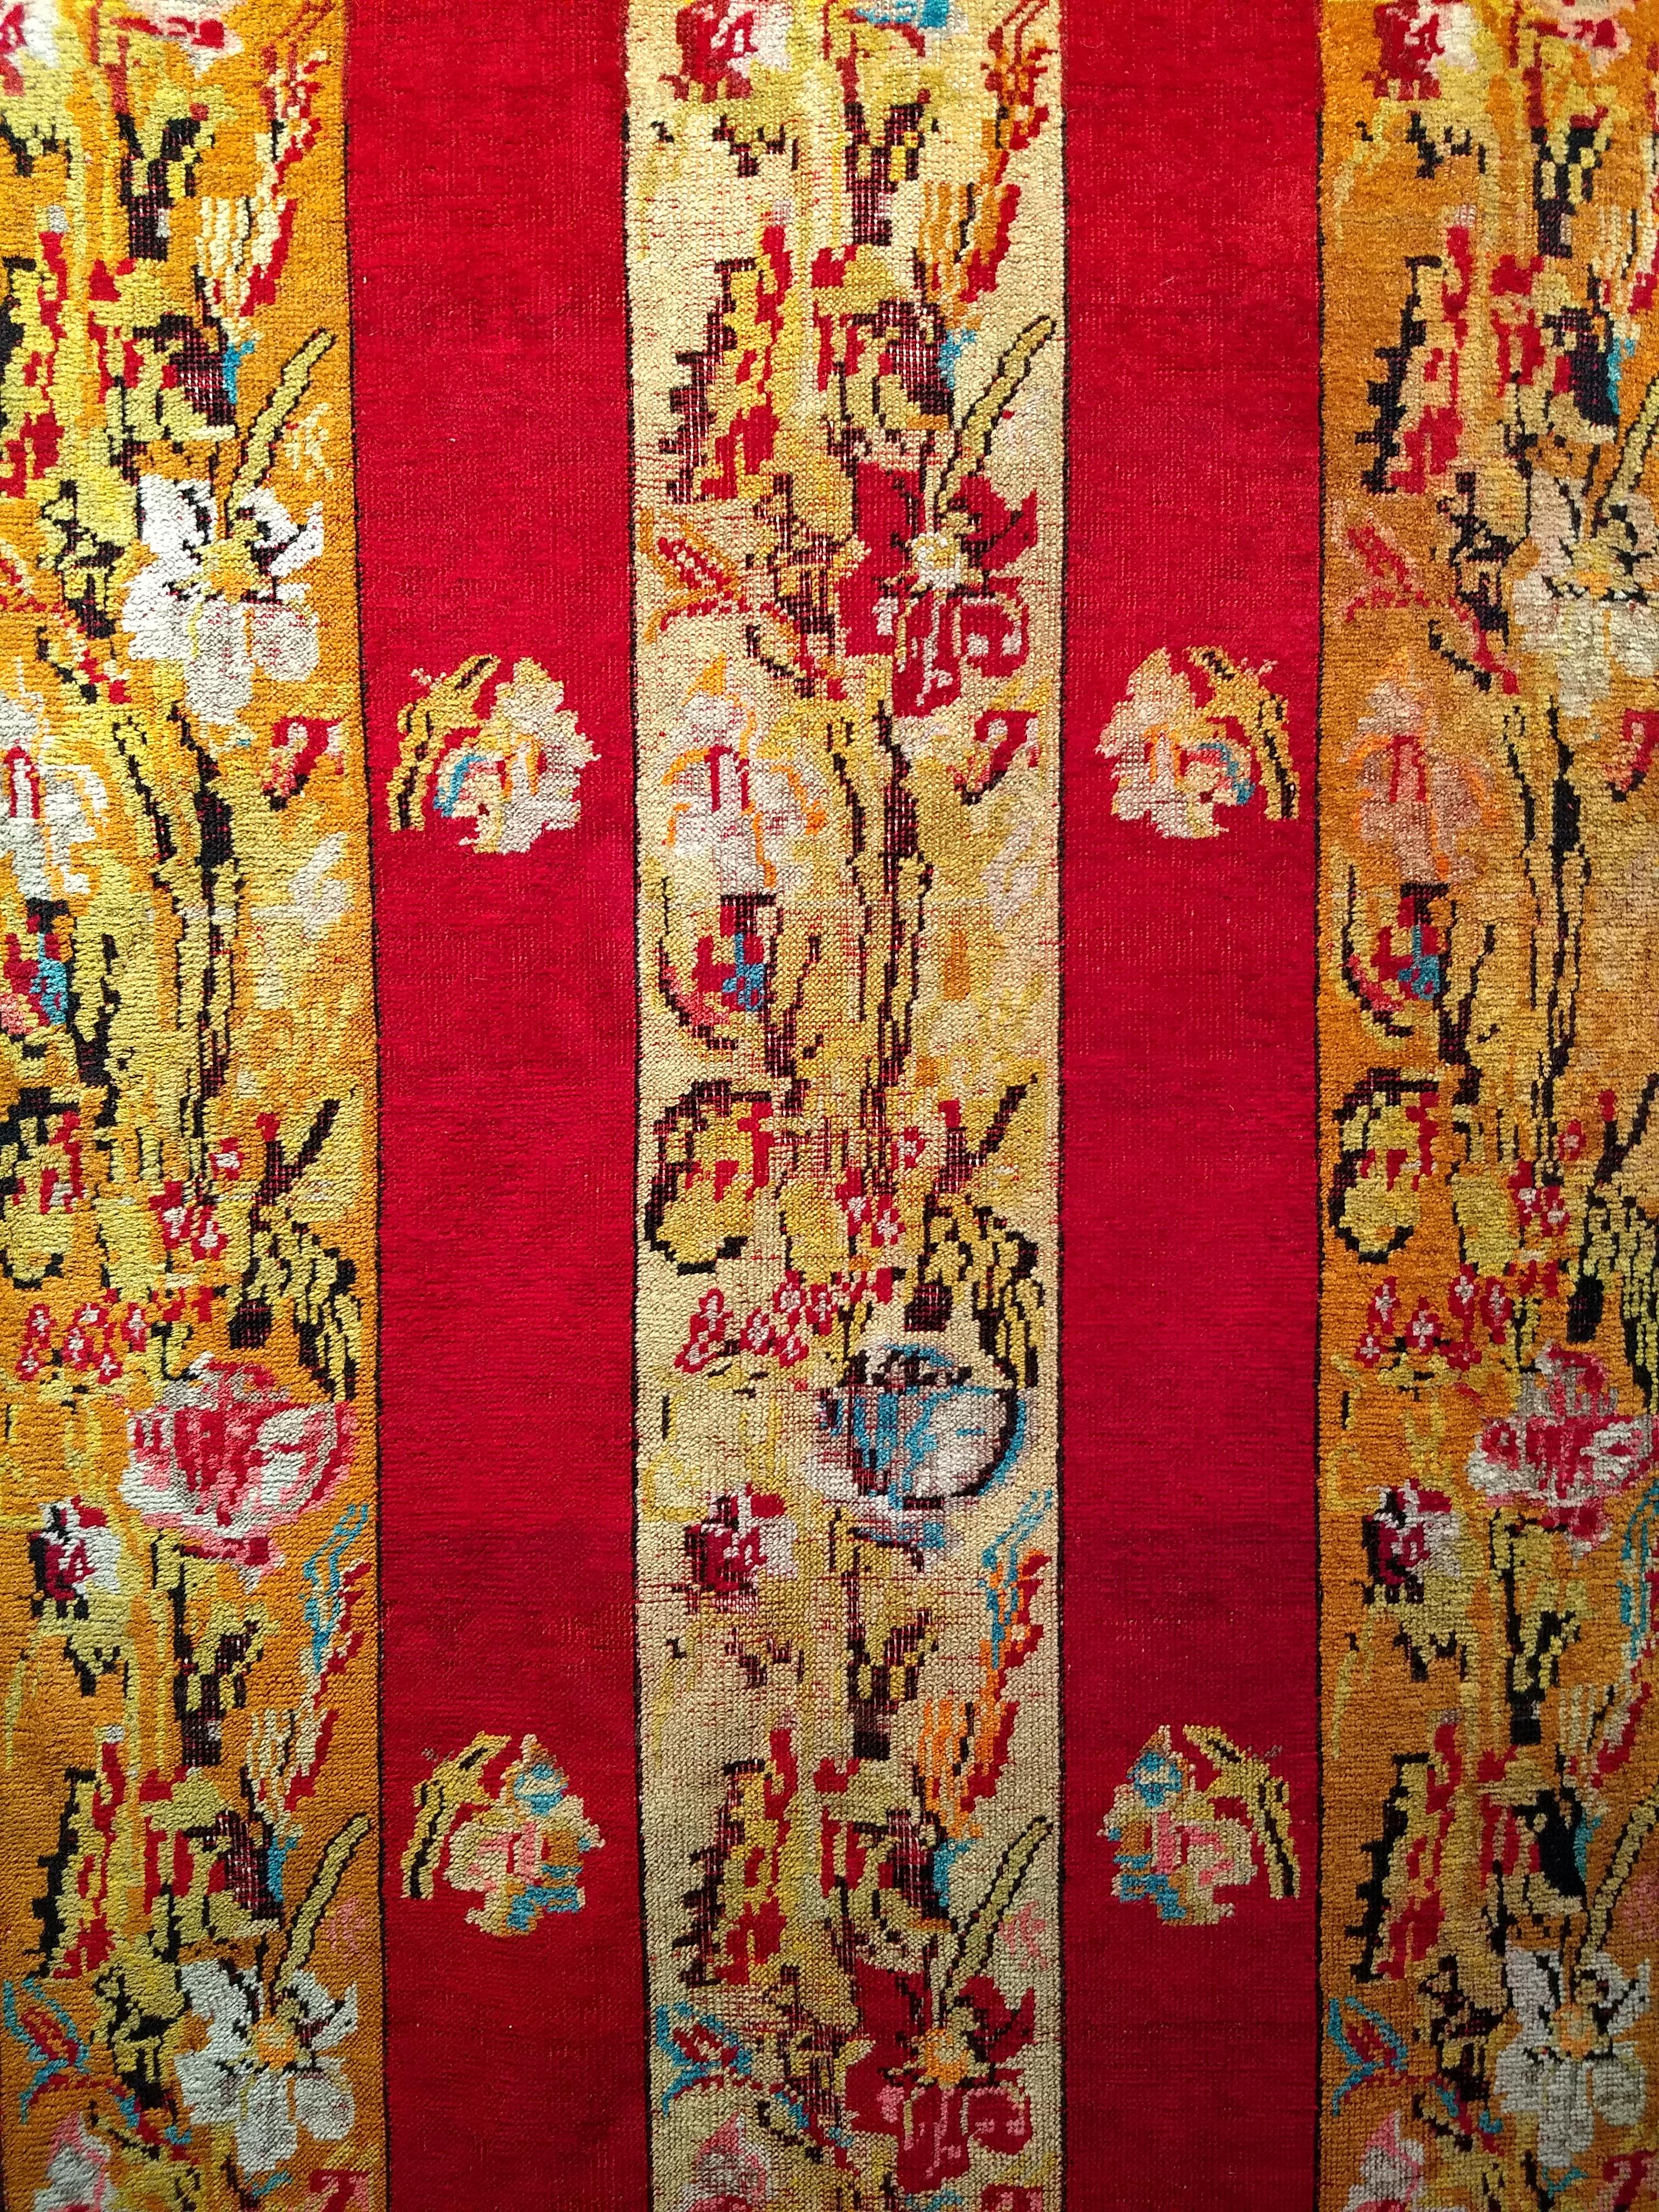 Vintage French Aubusson hand-knotted runner circa the early 1900s.  The Aubusson runner has a classic floral design pattern set on a brilliant red color background with floral designs in turquoise, red, pink, blue, cream, and other wonderful colors.